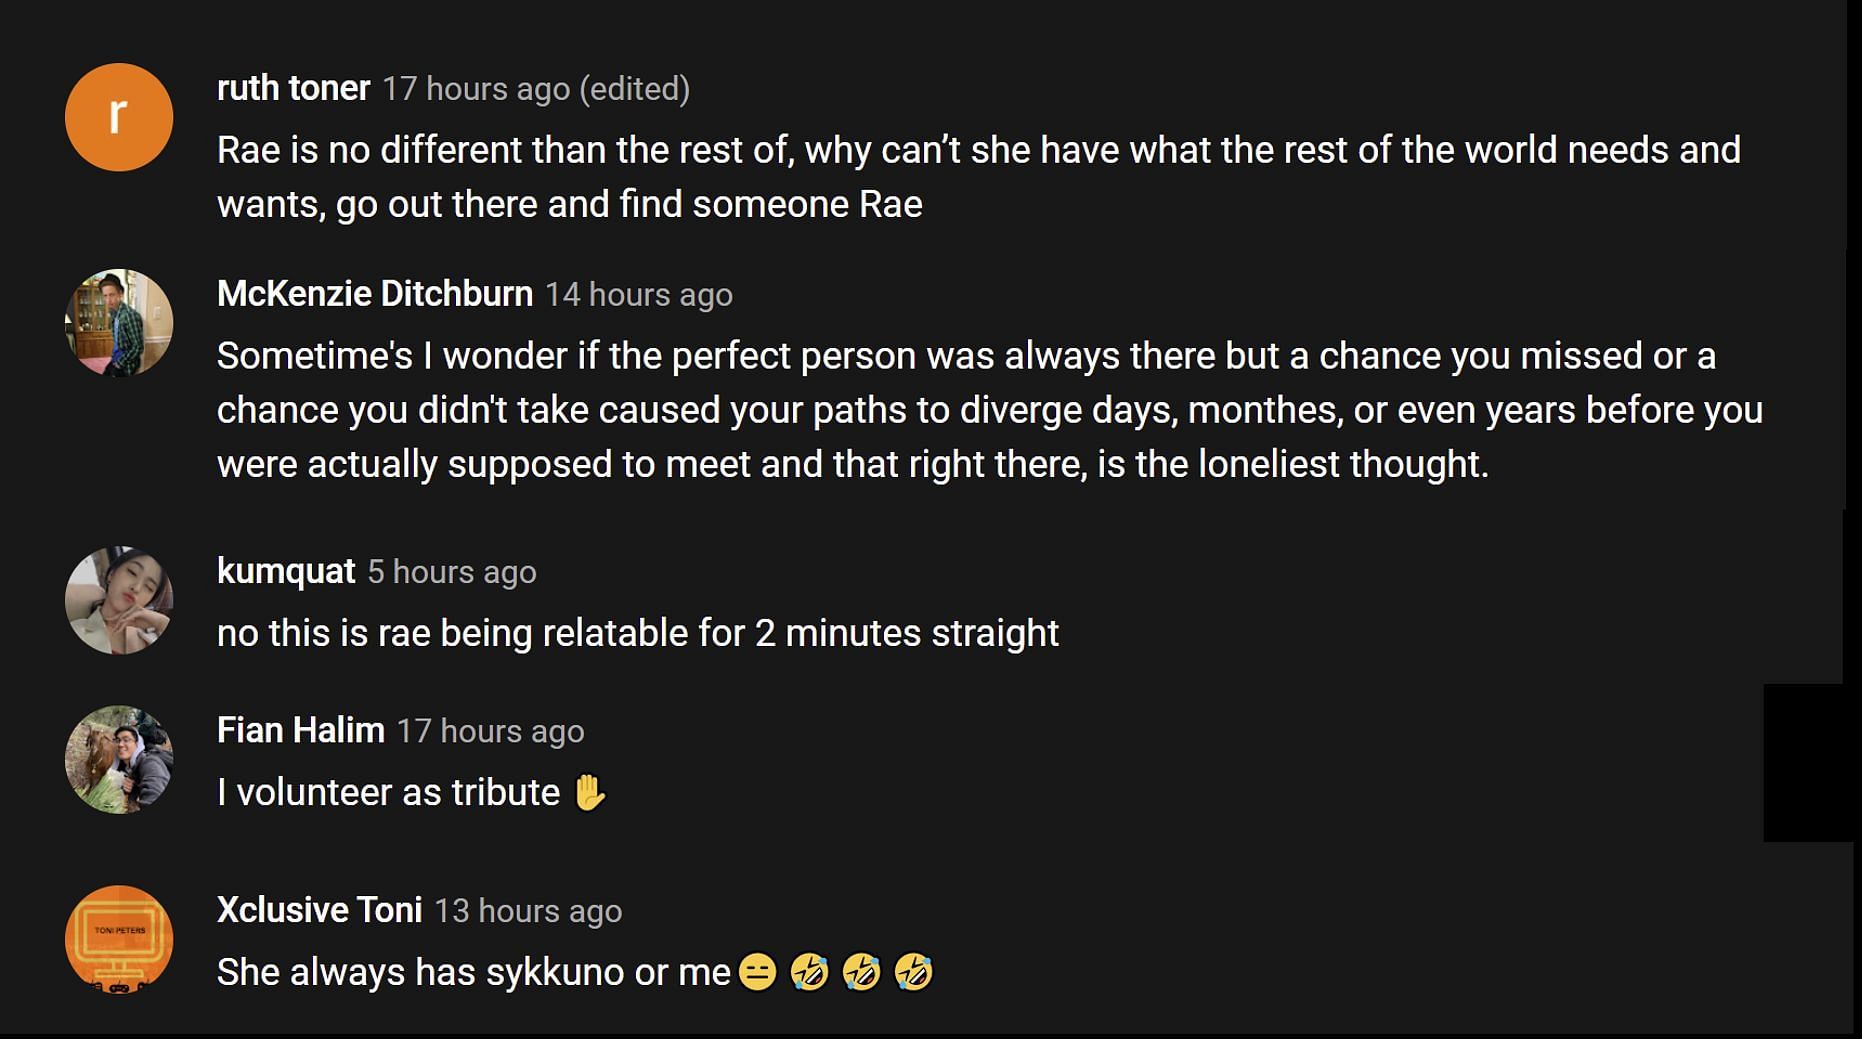 Help ^ to tell Rae how to find the live subscriber count : r/valkyrae